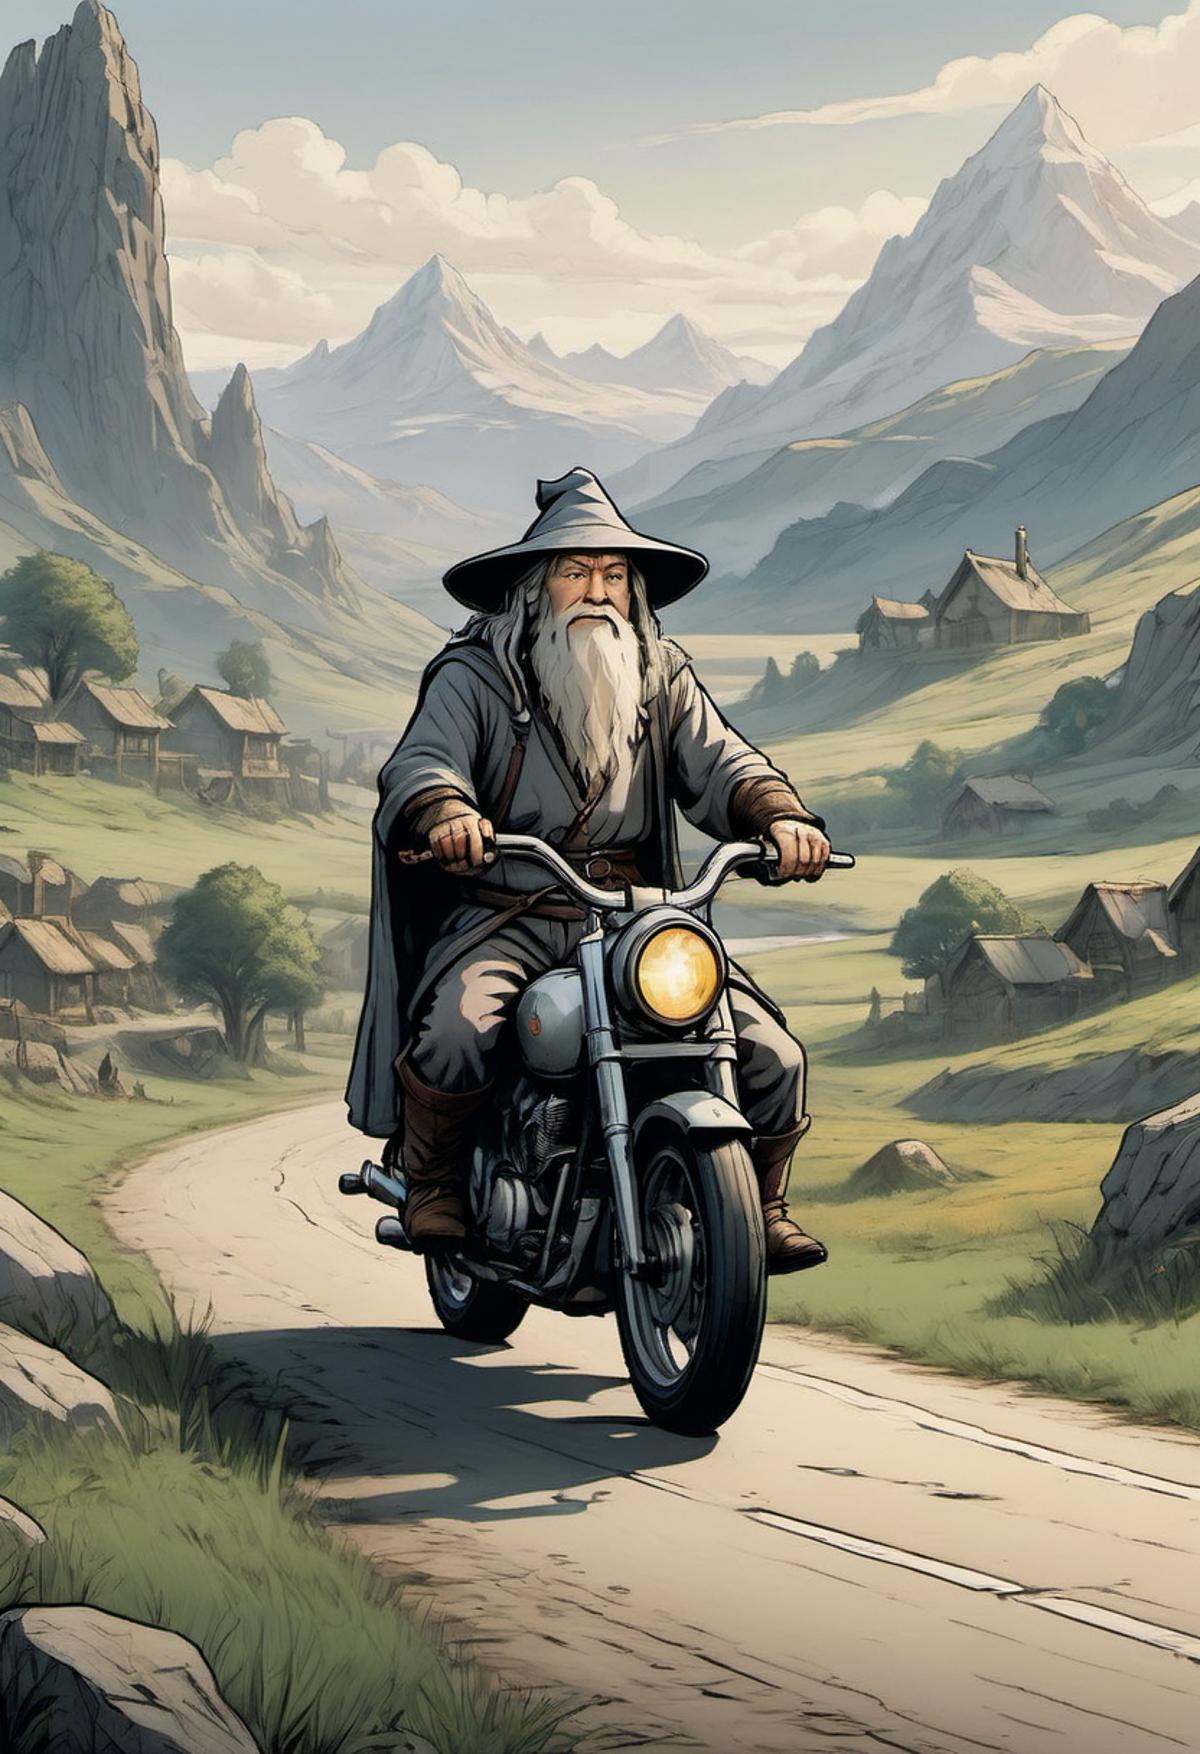 A man riding a motorcycle with a wizard hat on.